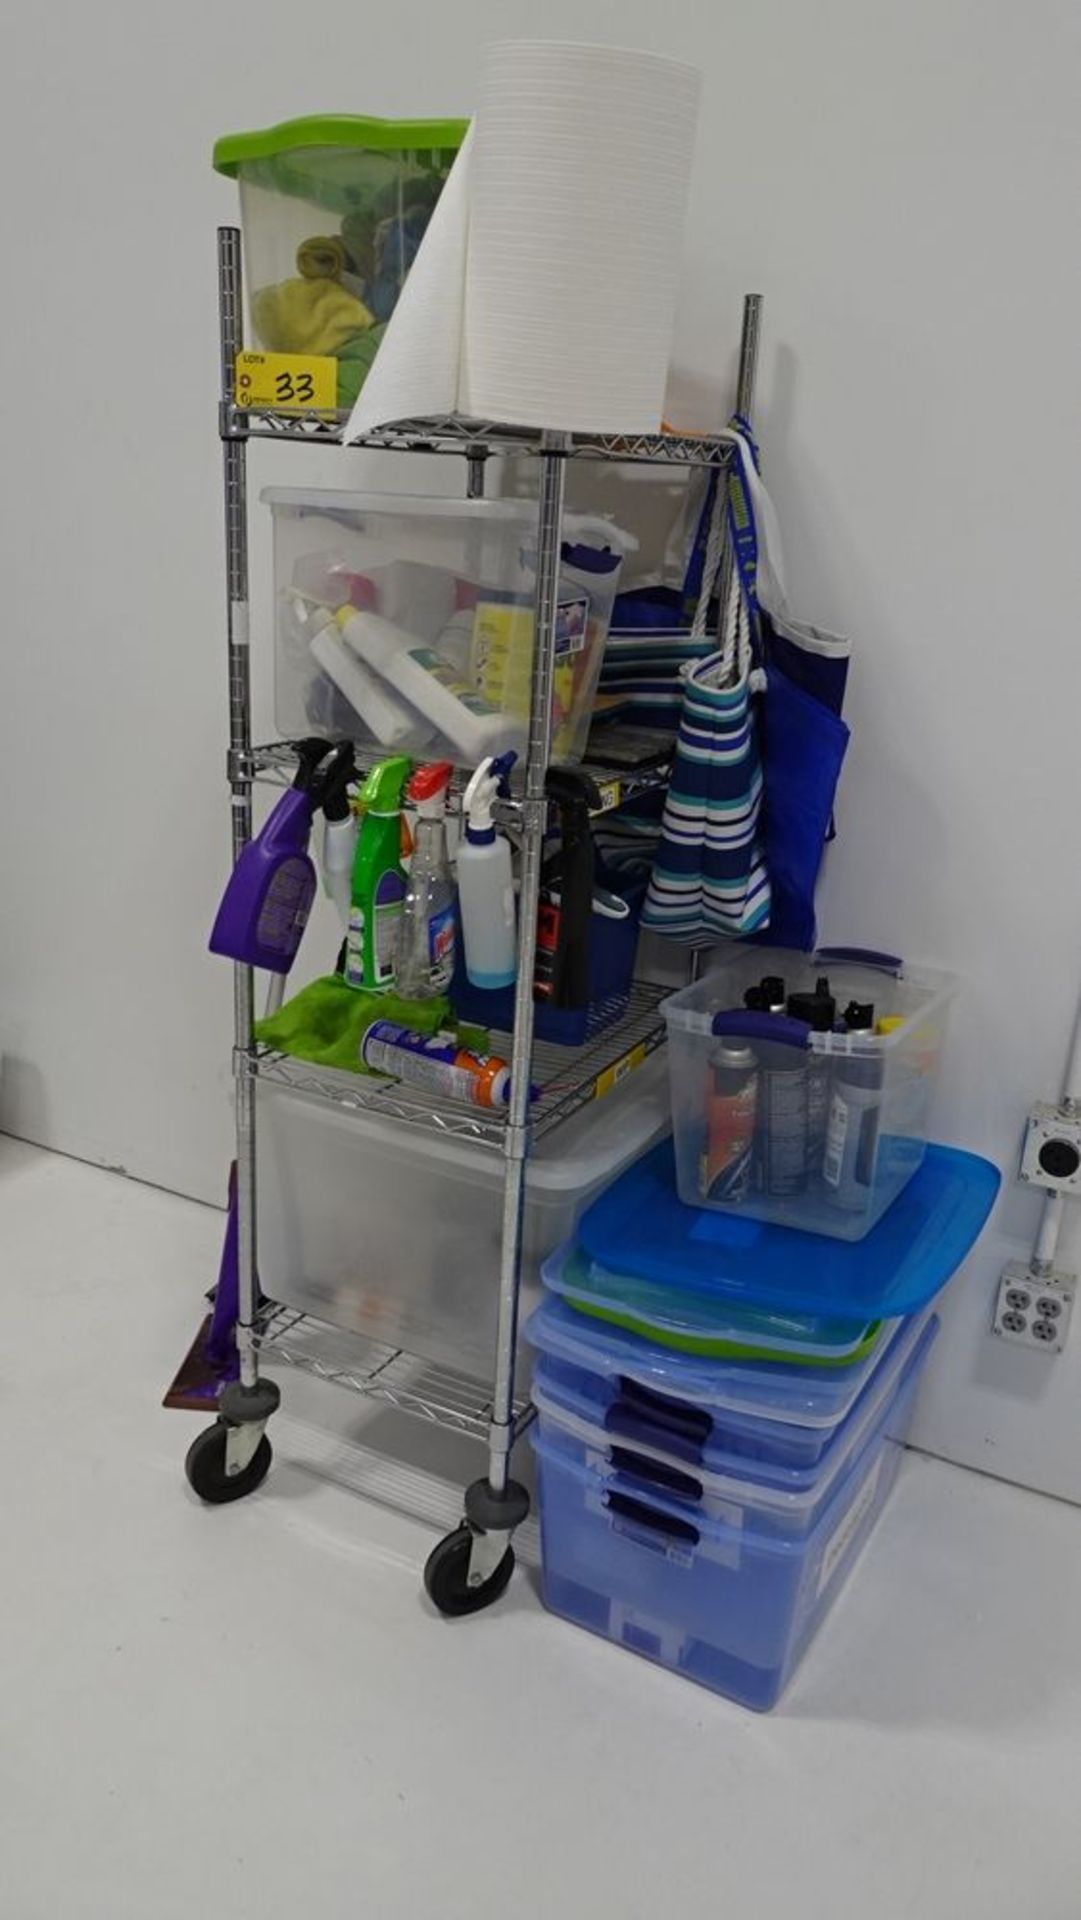 ASST. CLEANING PRODUCT C/W 4-WHEELED SHELF (REUTER) - Image 2 of 2